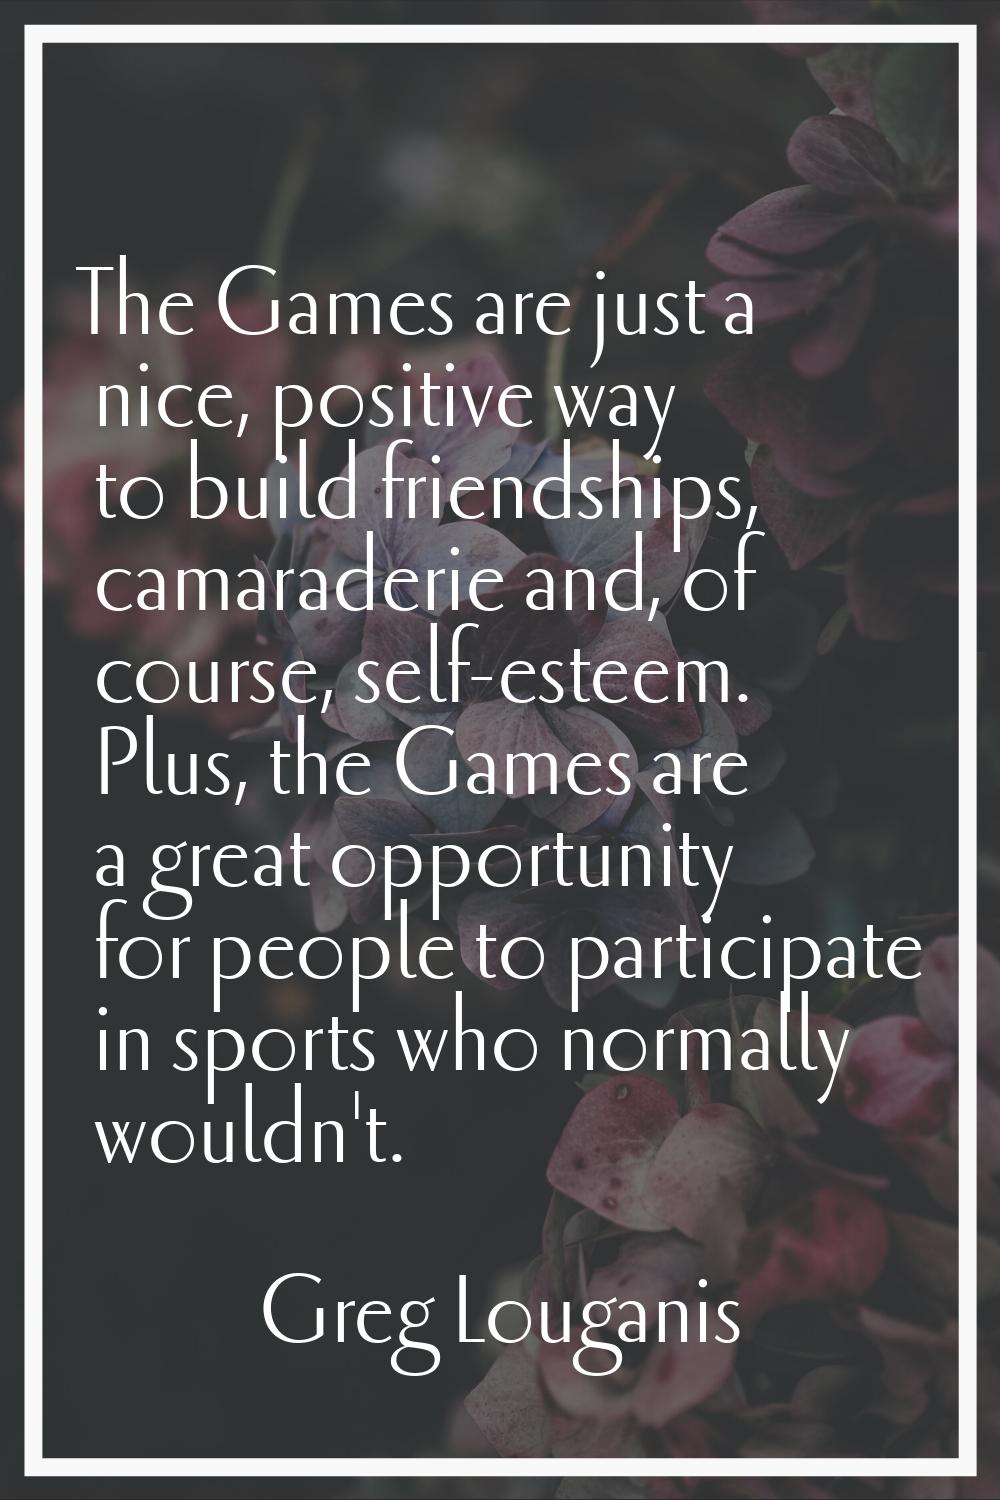 The Games are just a nice, positive way to build friendships, camaraderie and, of course, self-este